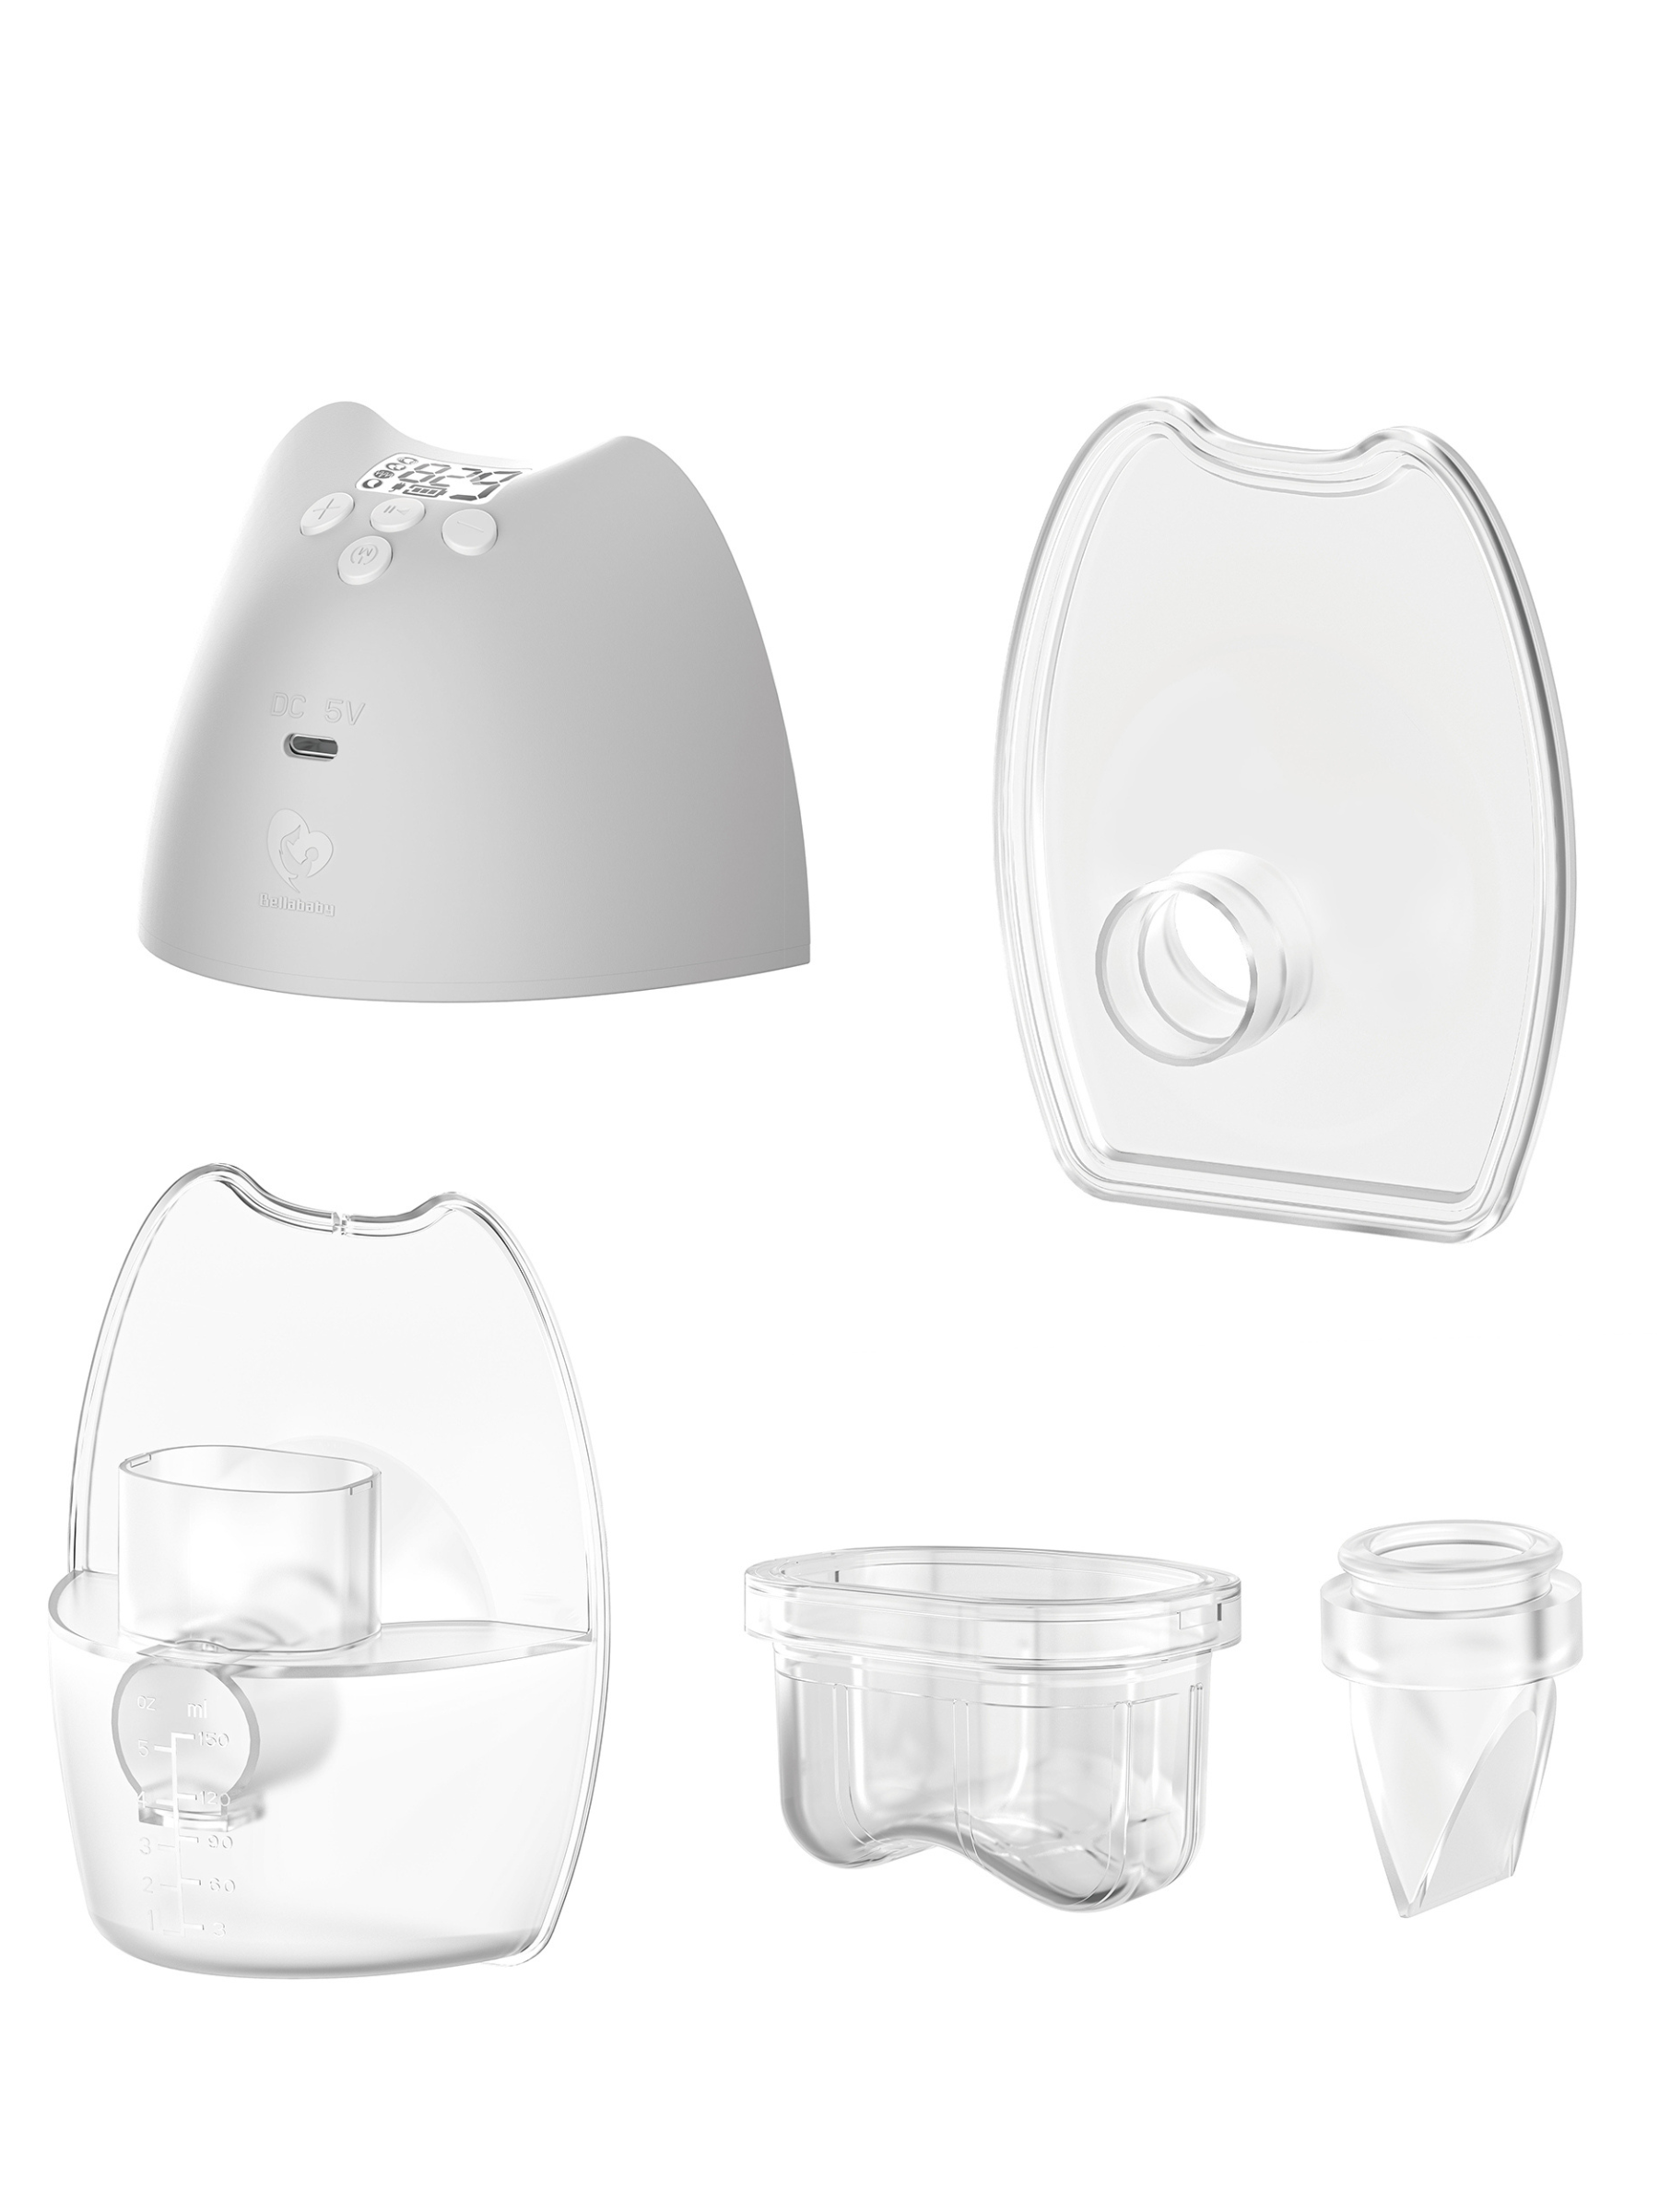 Bellababy W38, Hands-Free Breast Pump, Strong Suction and Painless